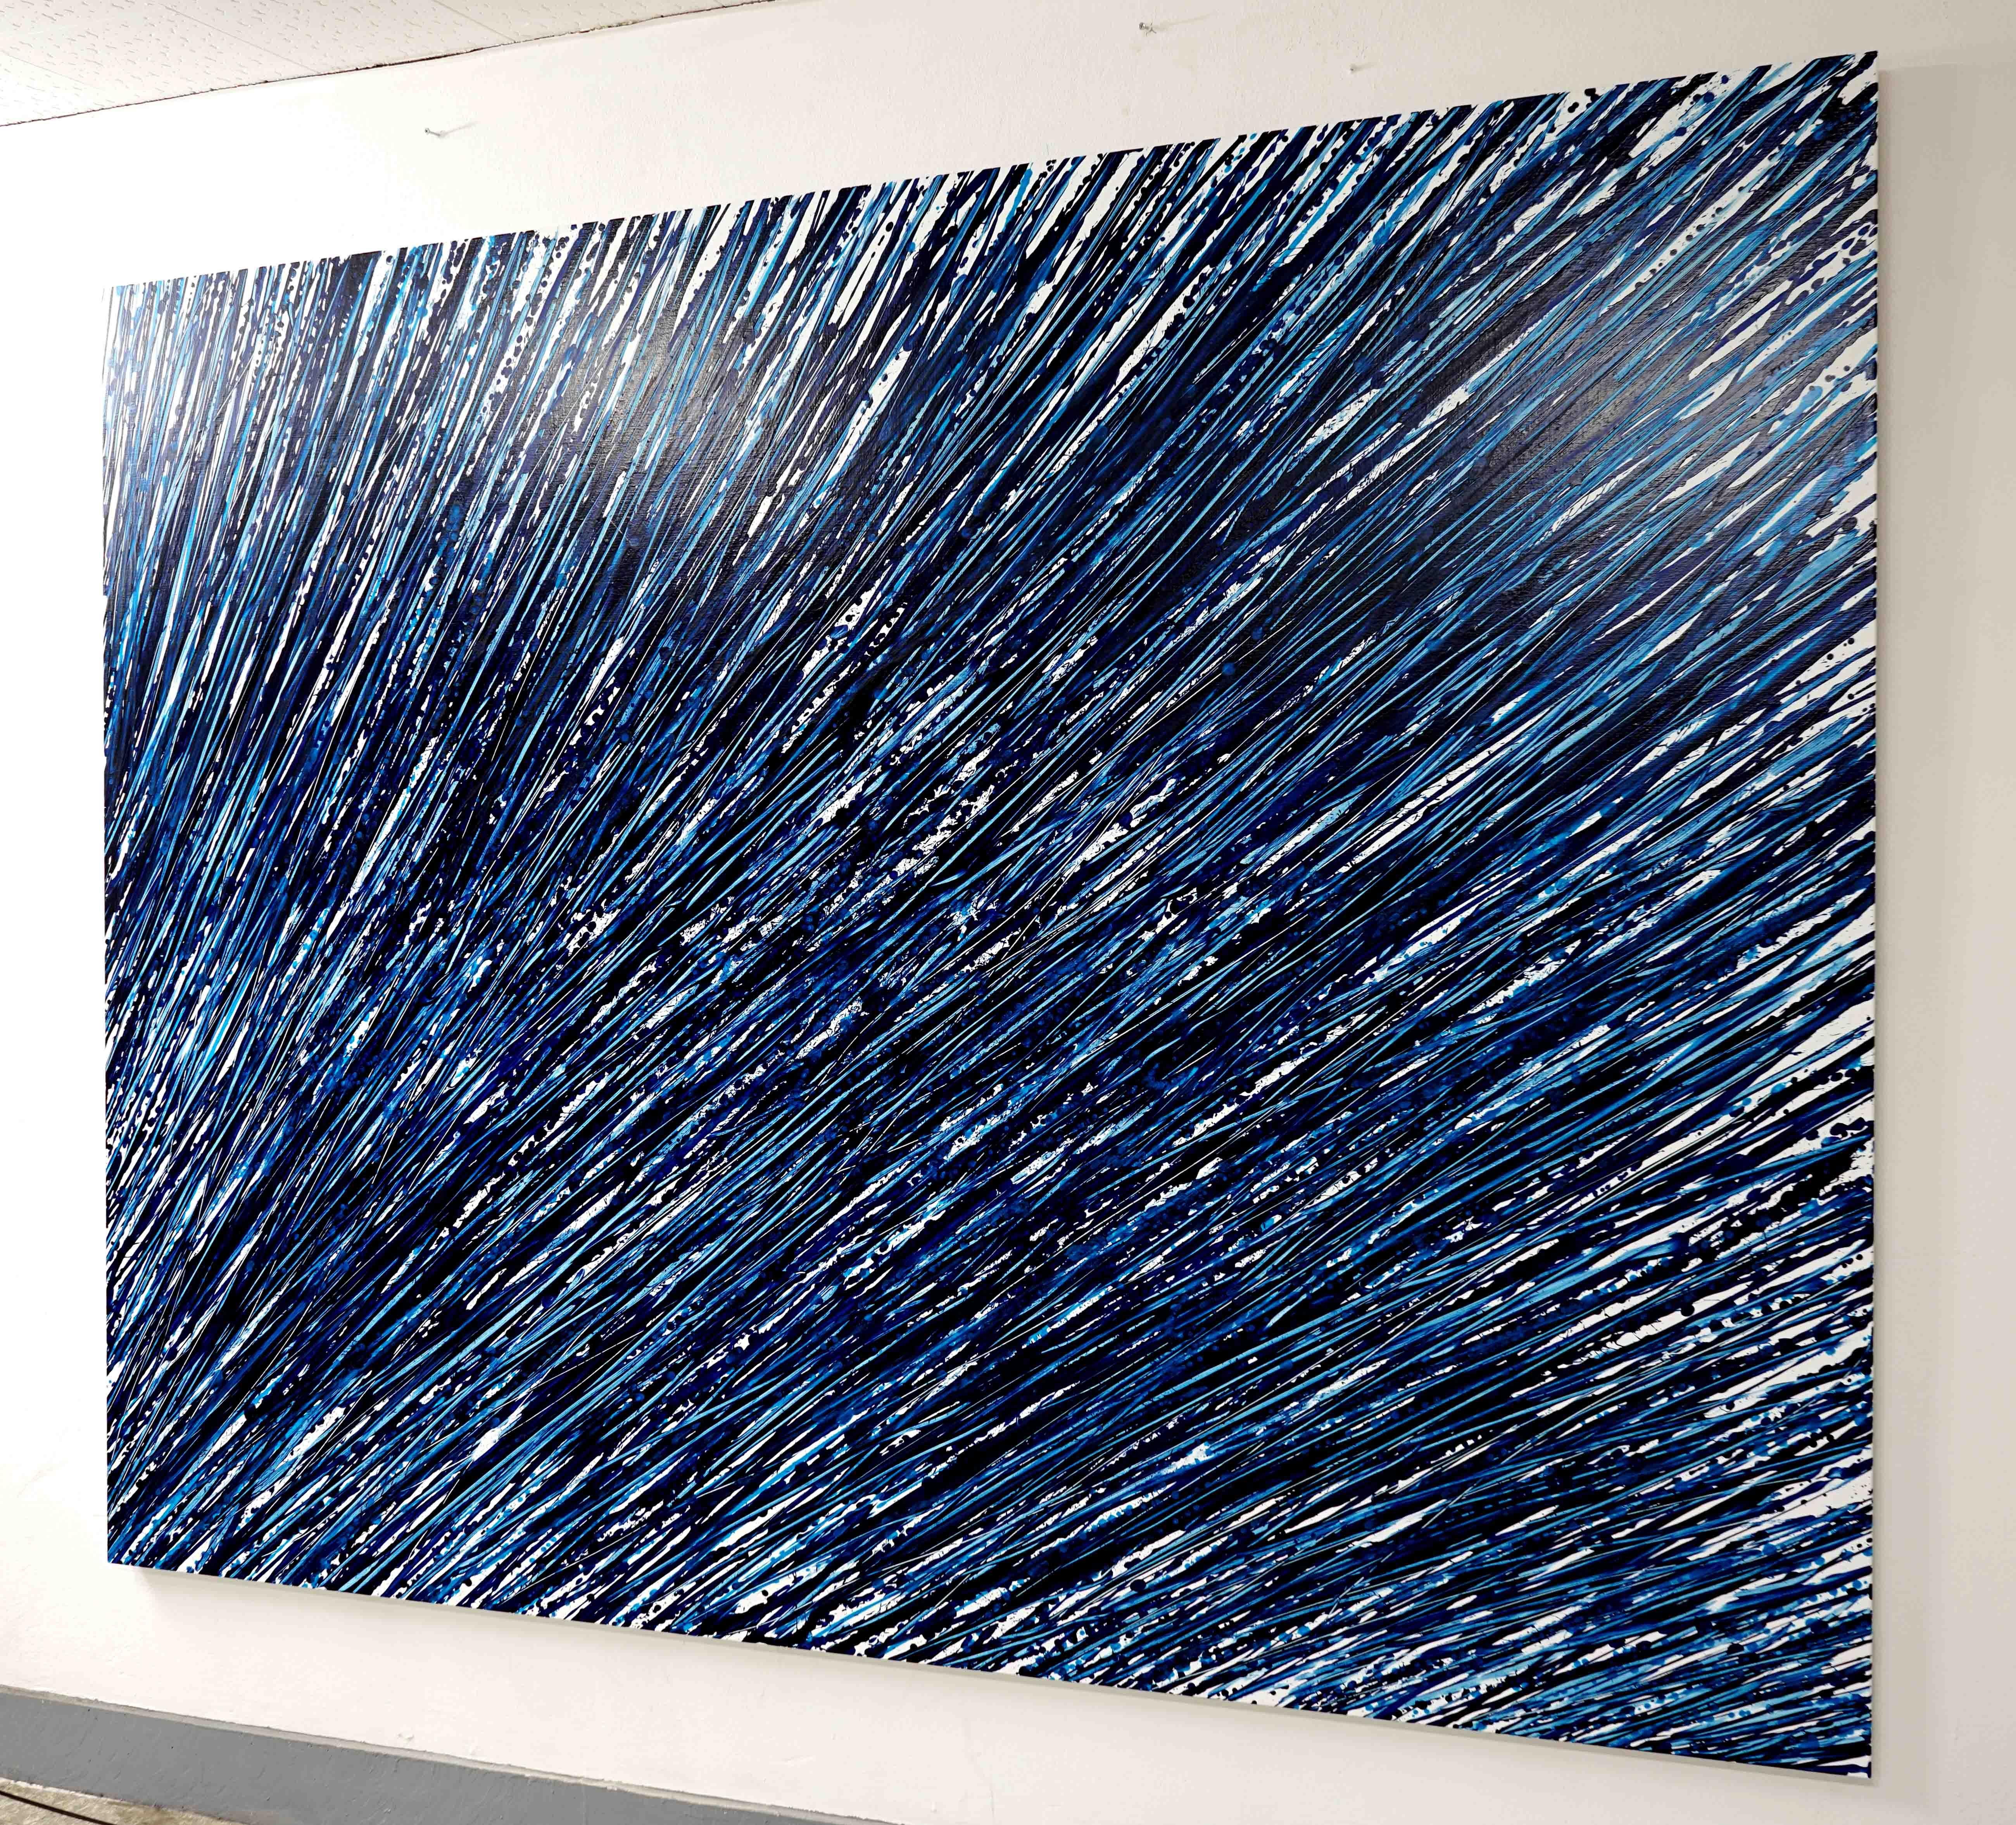 Beginning of the Stop 49-2018 is a vibrant contemporary abstract expressionist art by South Korean artist, Seungyoon Choi. It is a large oil painting on canvas with a strong blue and black color aesthetic and expressive brush strokes. A dynamic